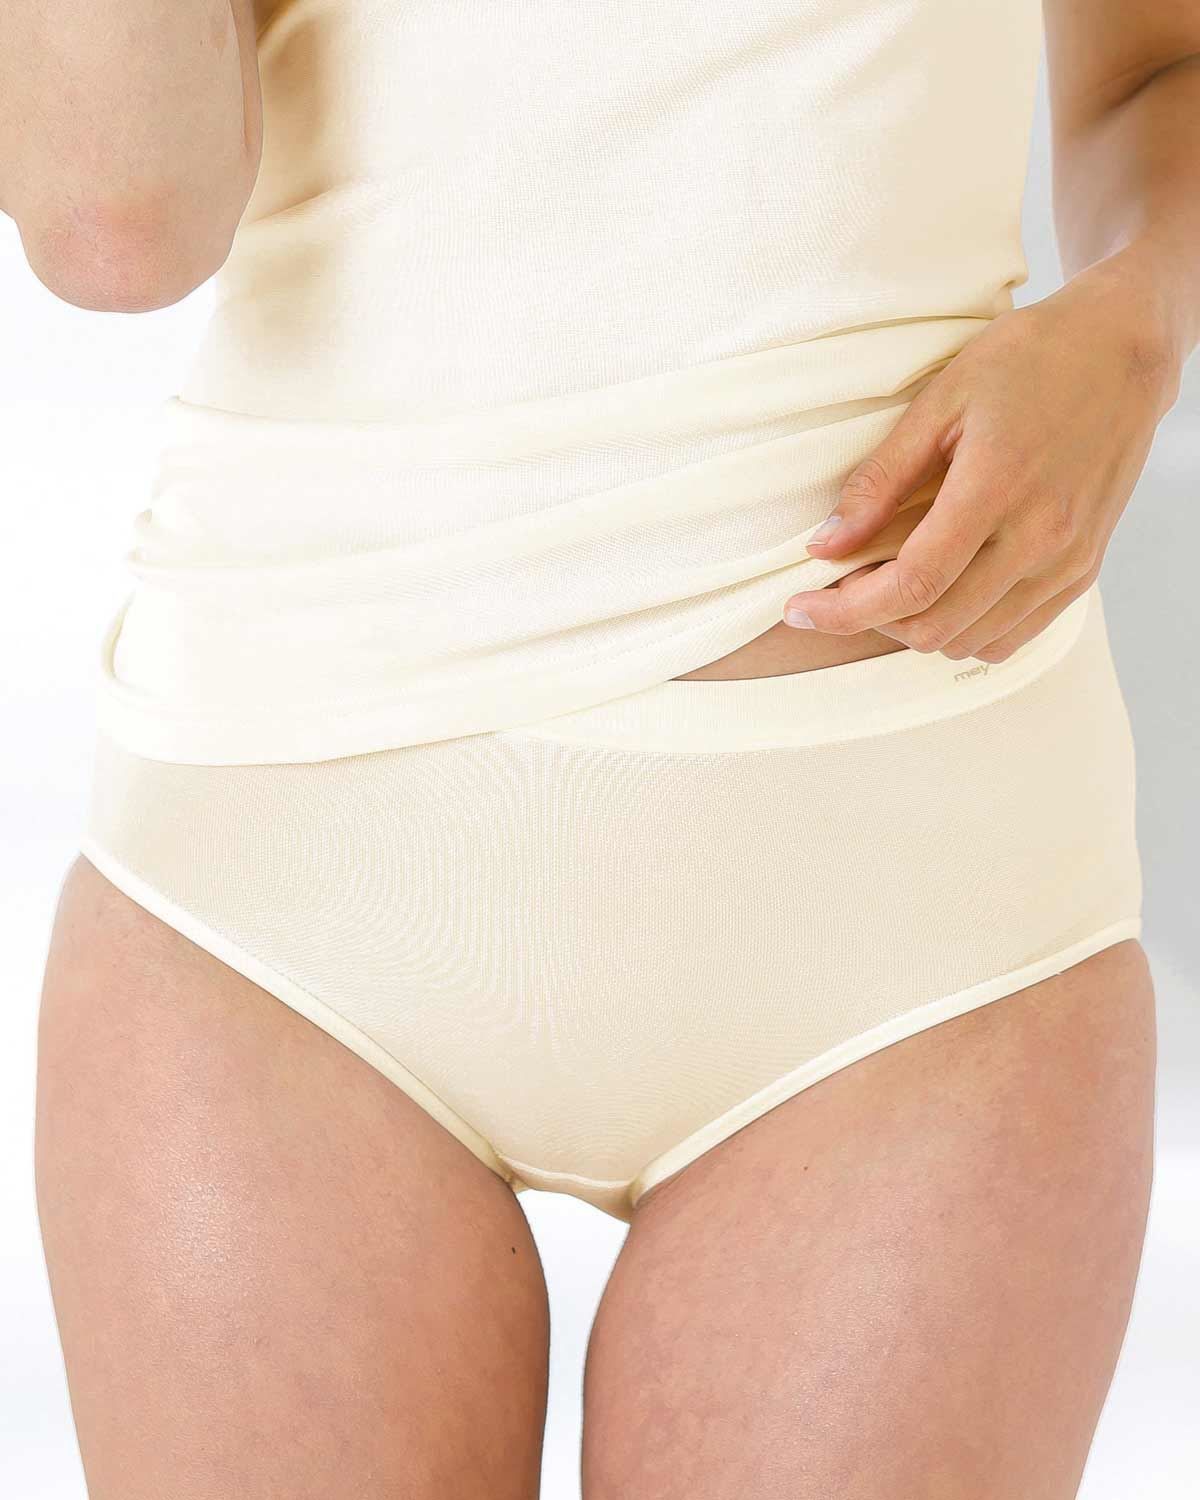 Ladies Seam-free Briefs. Available in White, Champagne or Black.